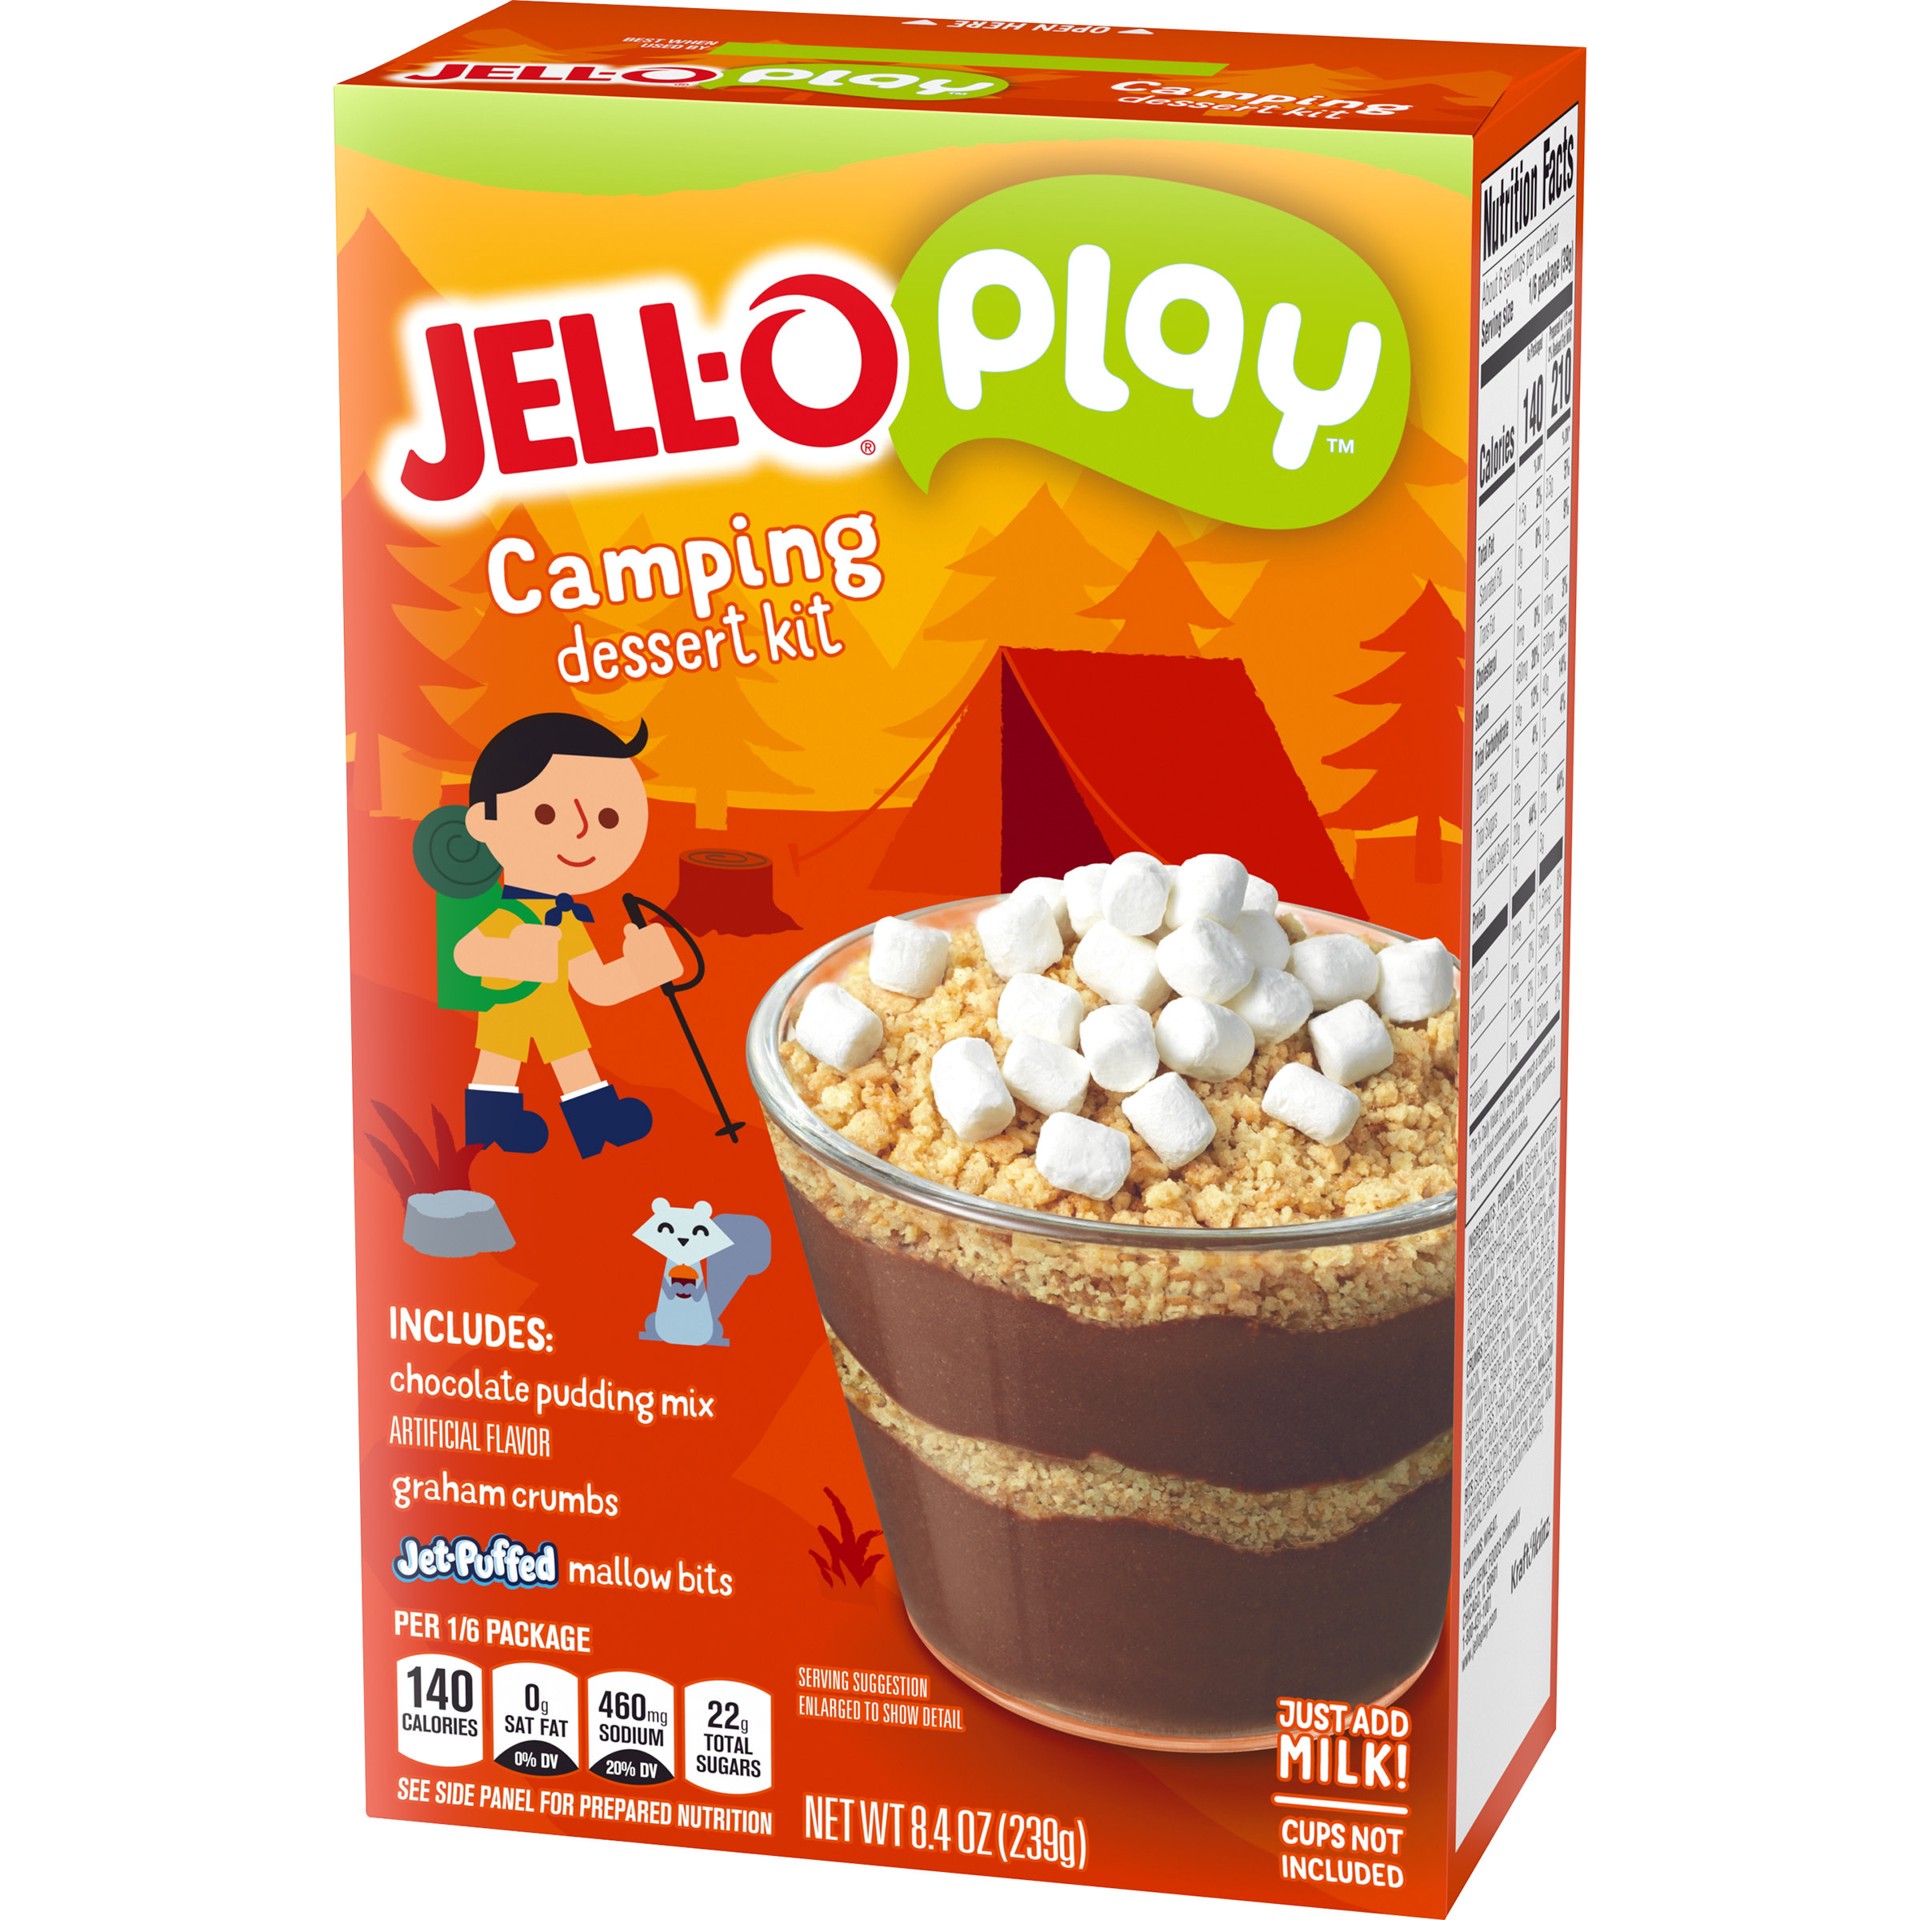 slide 7 of 11, Jell-O Play Camping Dessert Kit with Chocolate Pudding Mix, Graham Crumbs & Jet-Puffed Marshmallow Bits, 8.4 oz Box, 8.4 oz